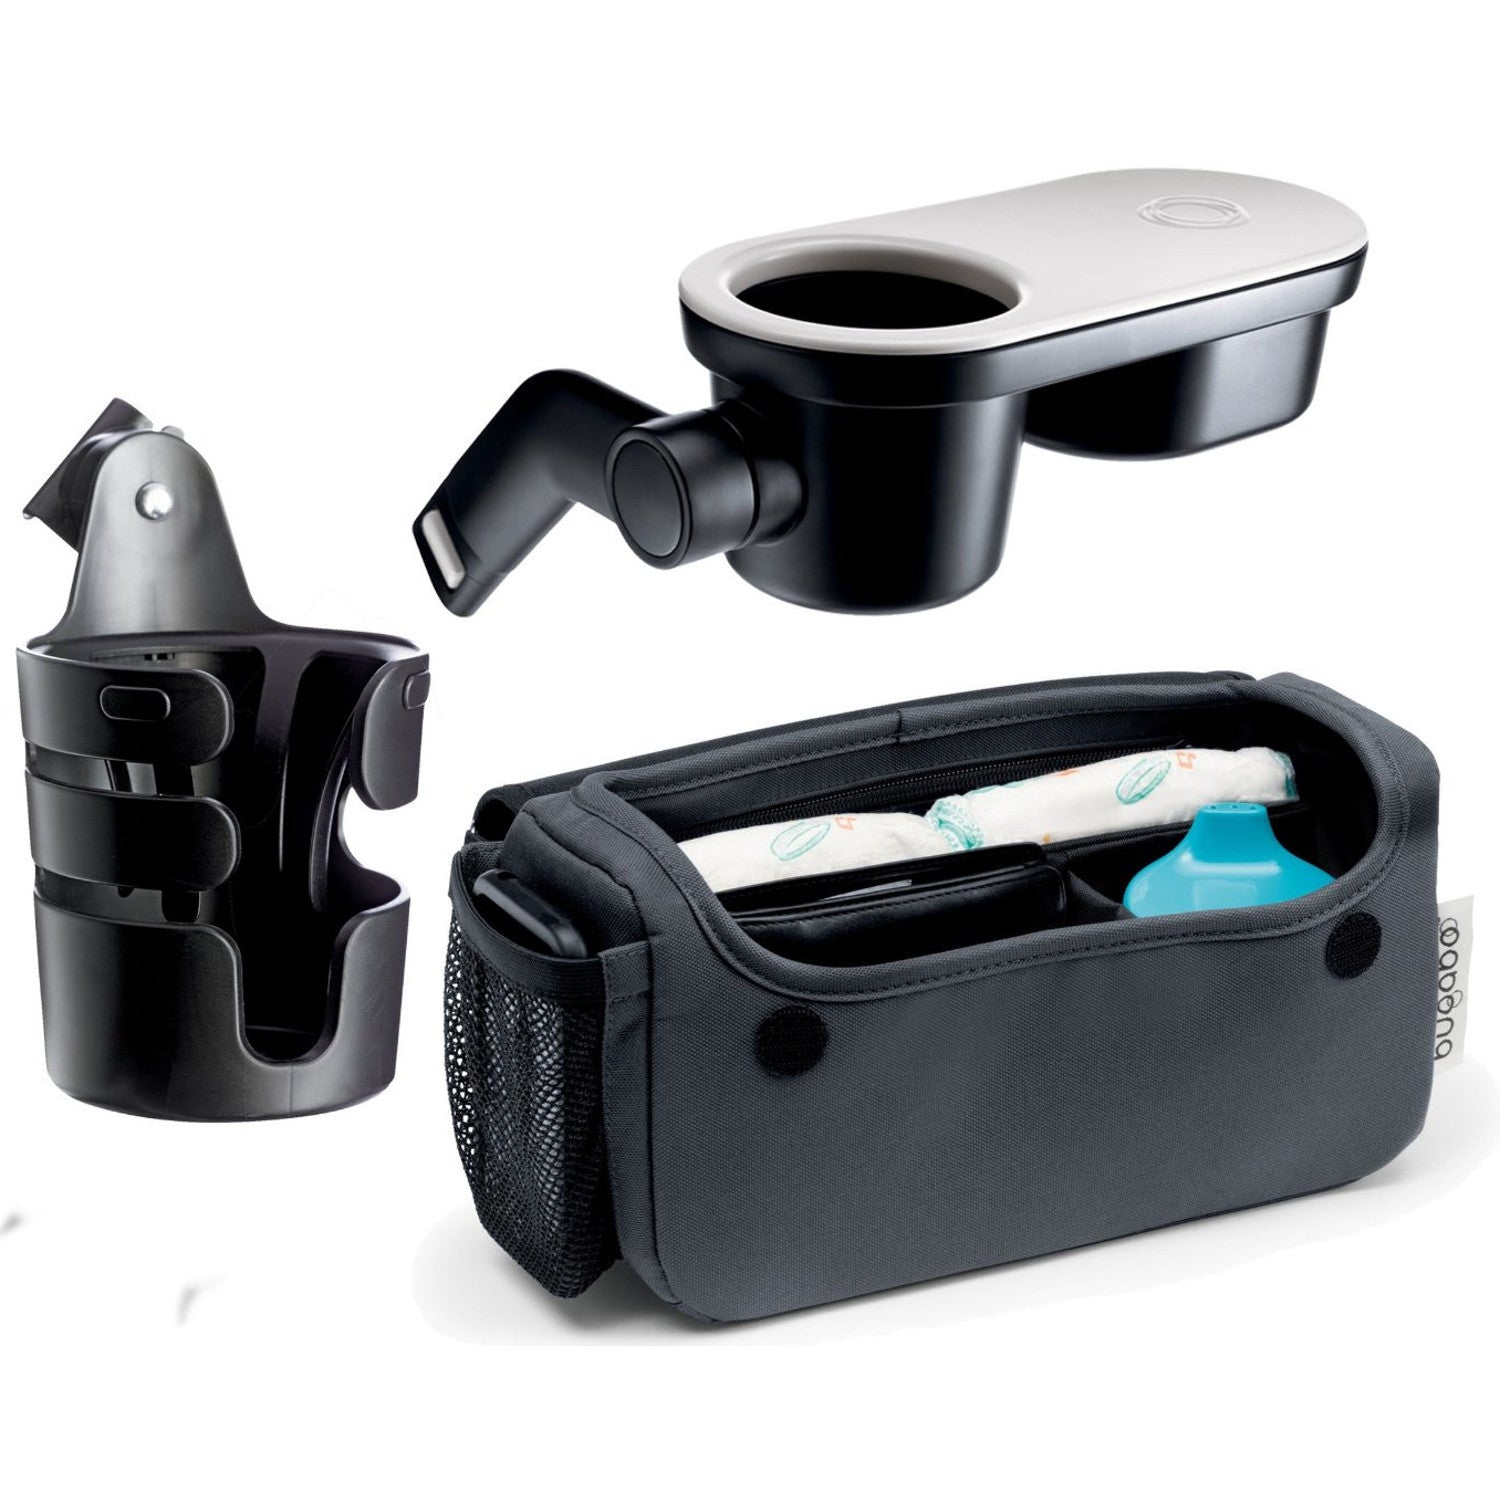 bugaboo cup holder